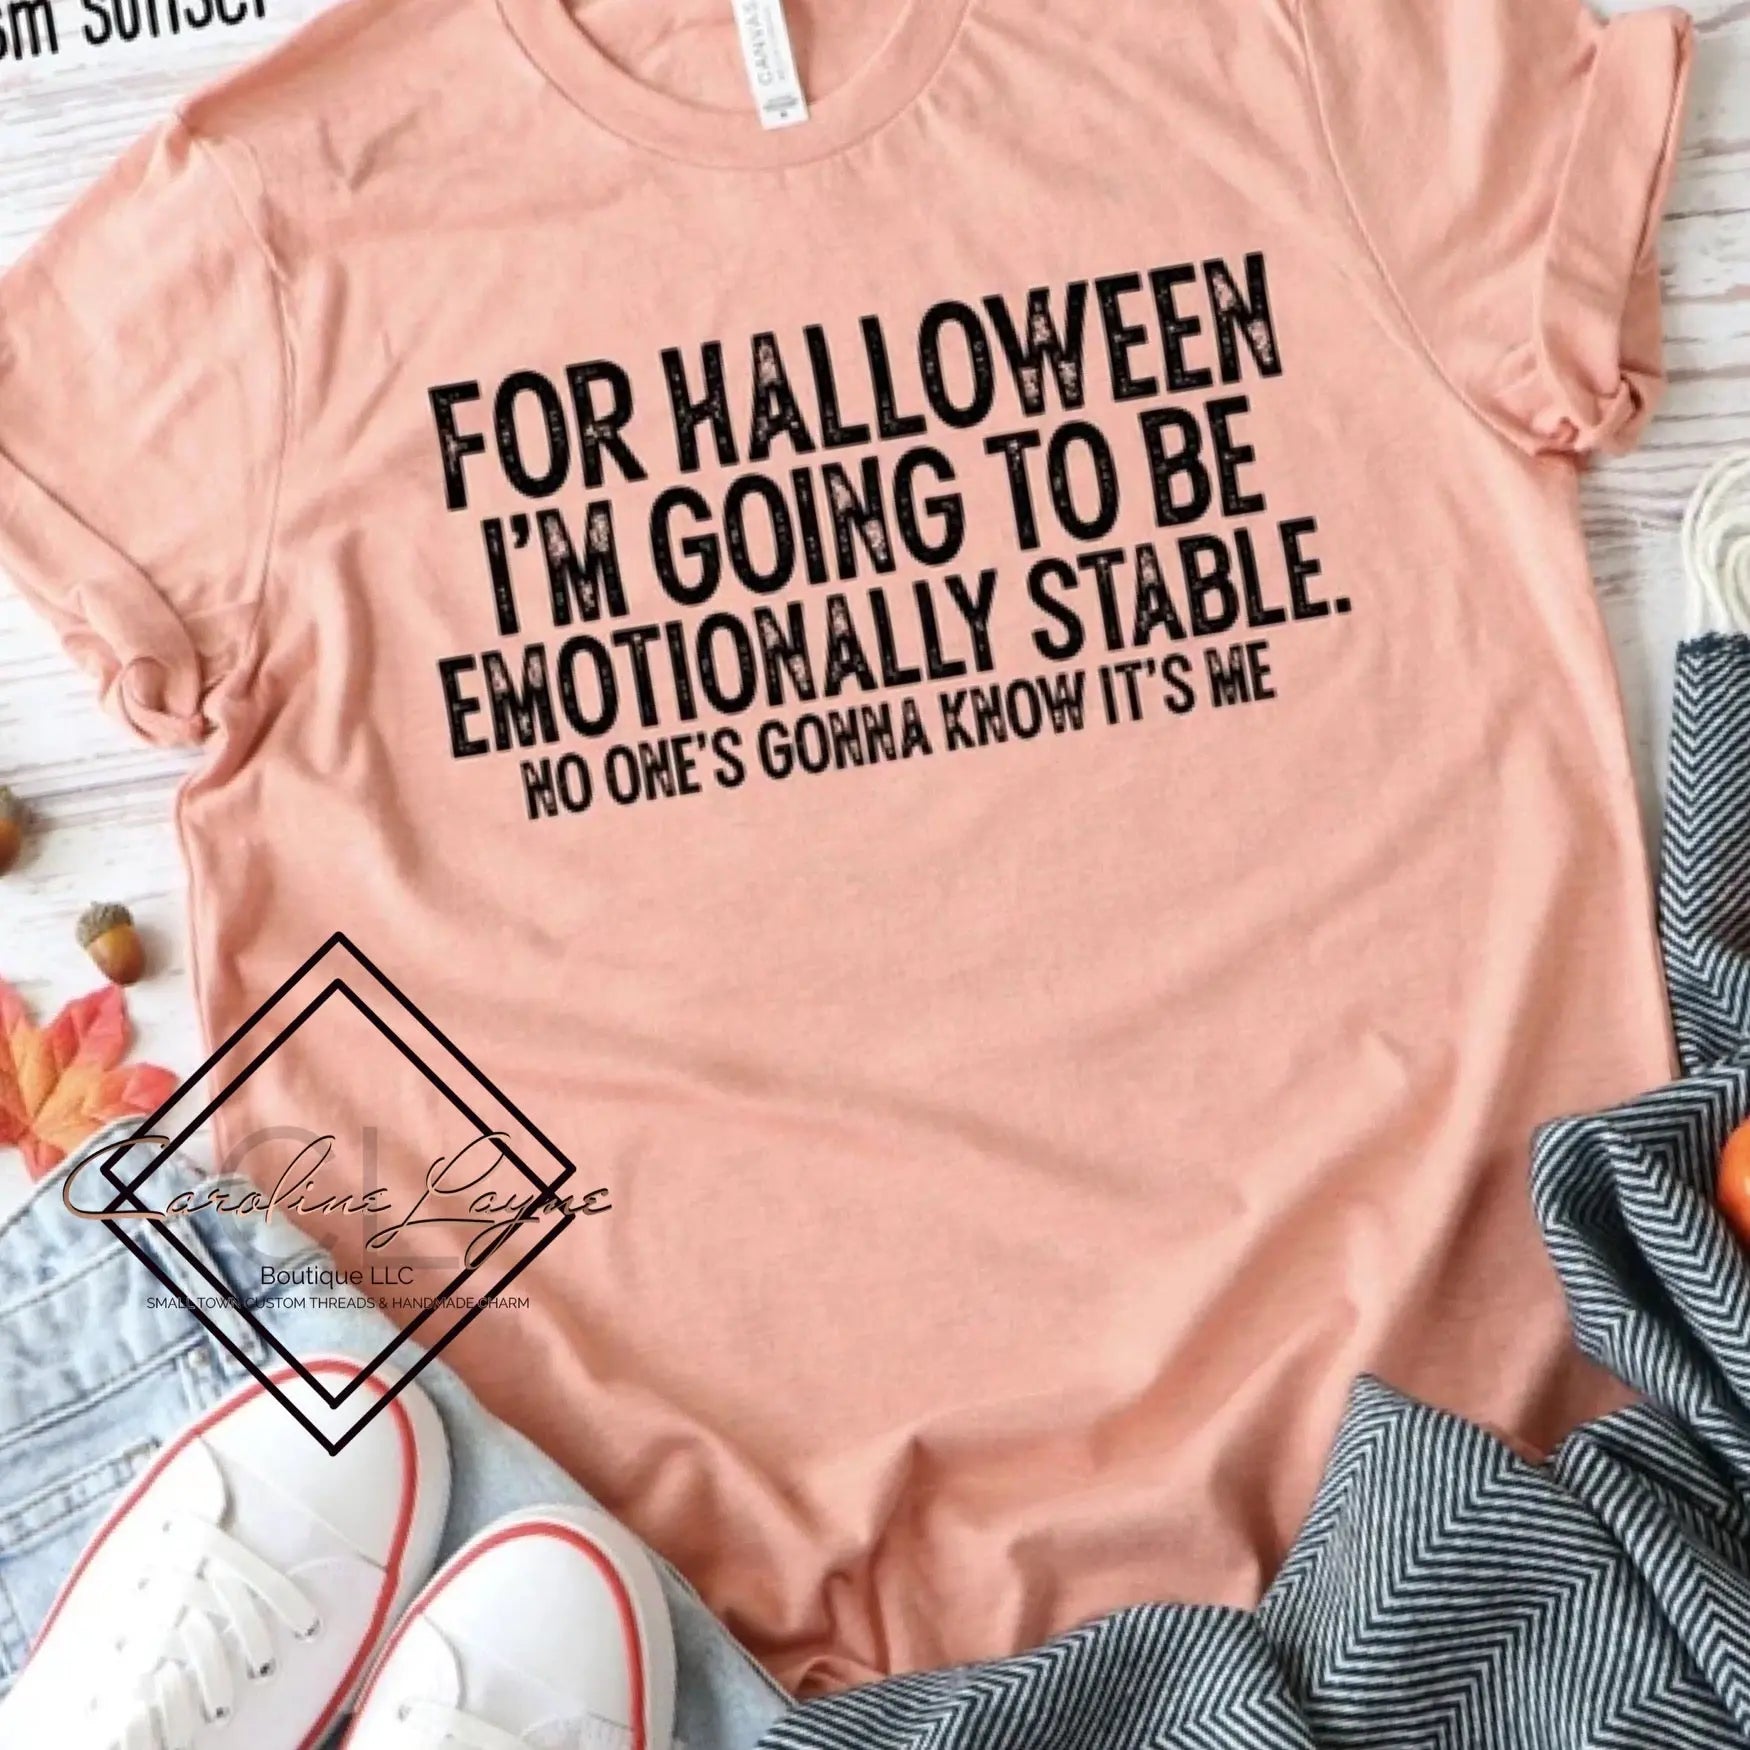 For Halloween Im Going To Be Emotionally Stable Tee - Caroline Layne Boutique LLC